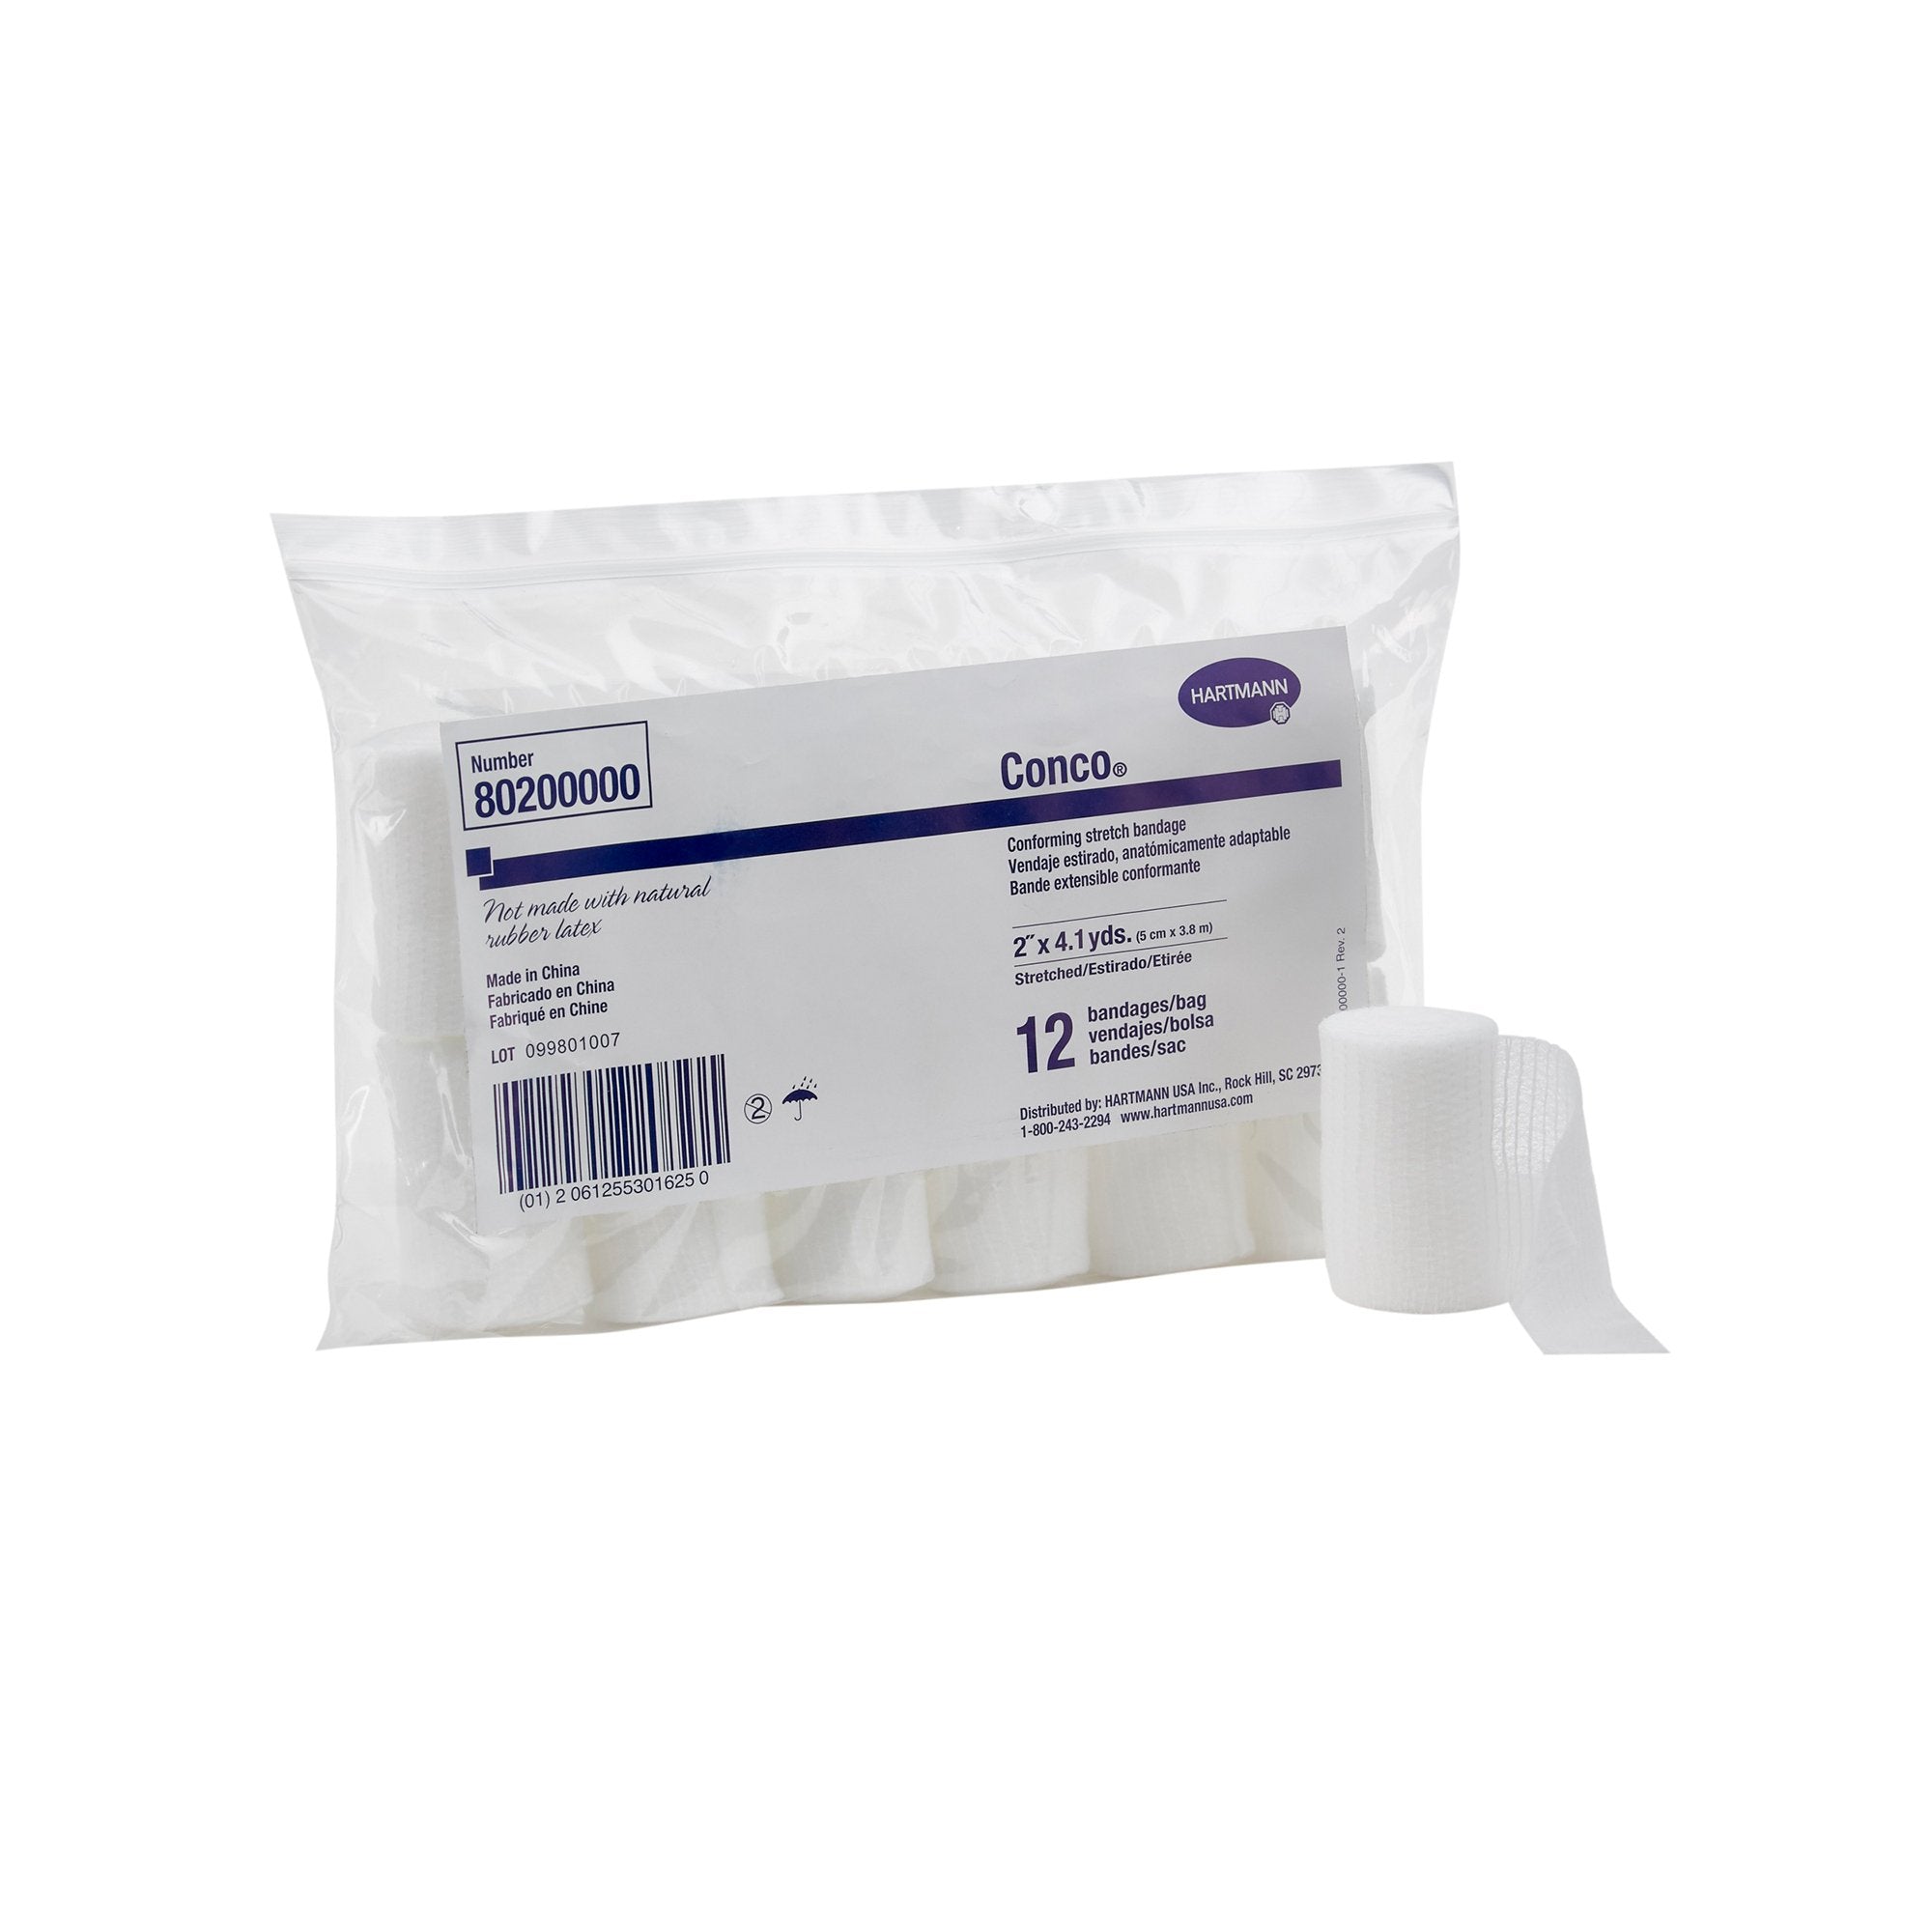 Conforming Bandage Conco® 2 Inch X 4-1/10 Yard 12 per Pack NonSterile 1-Ply Roll Shape